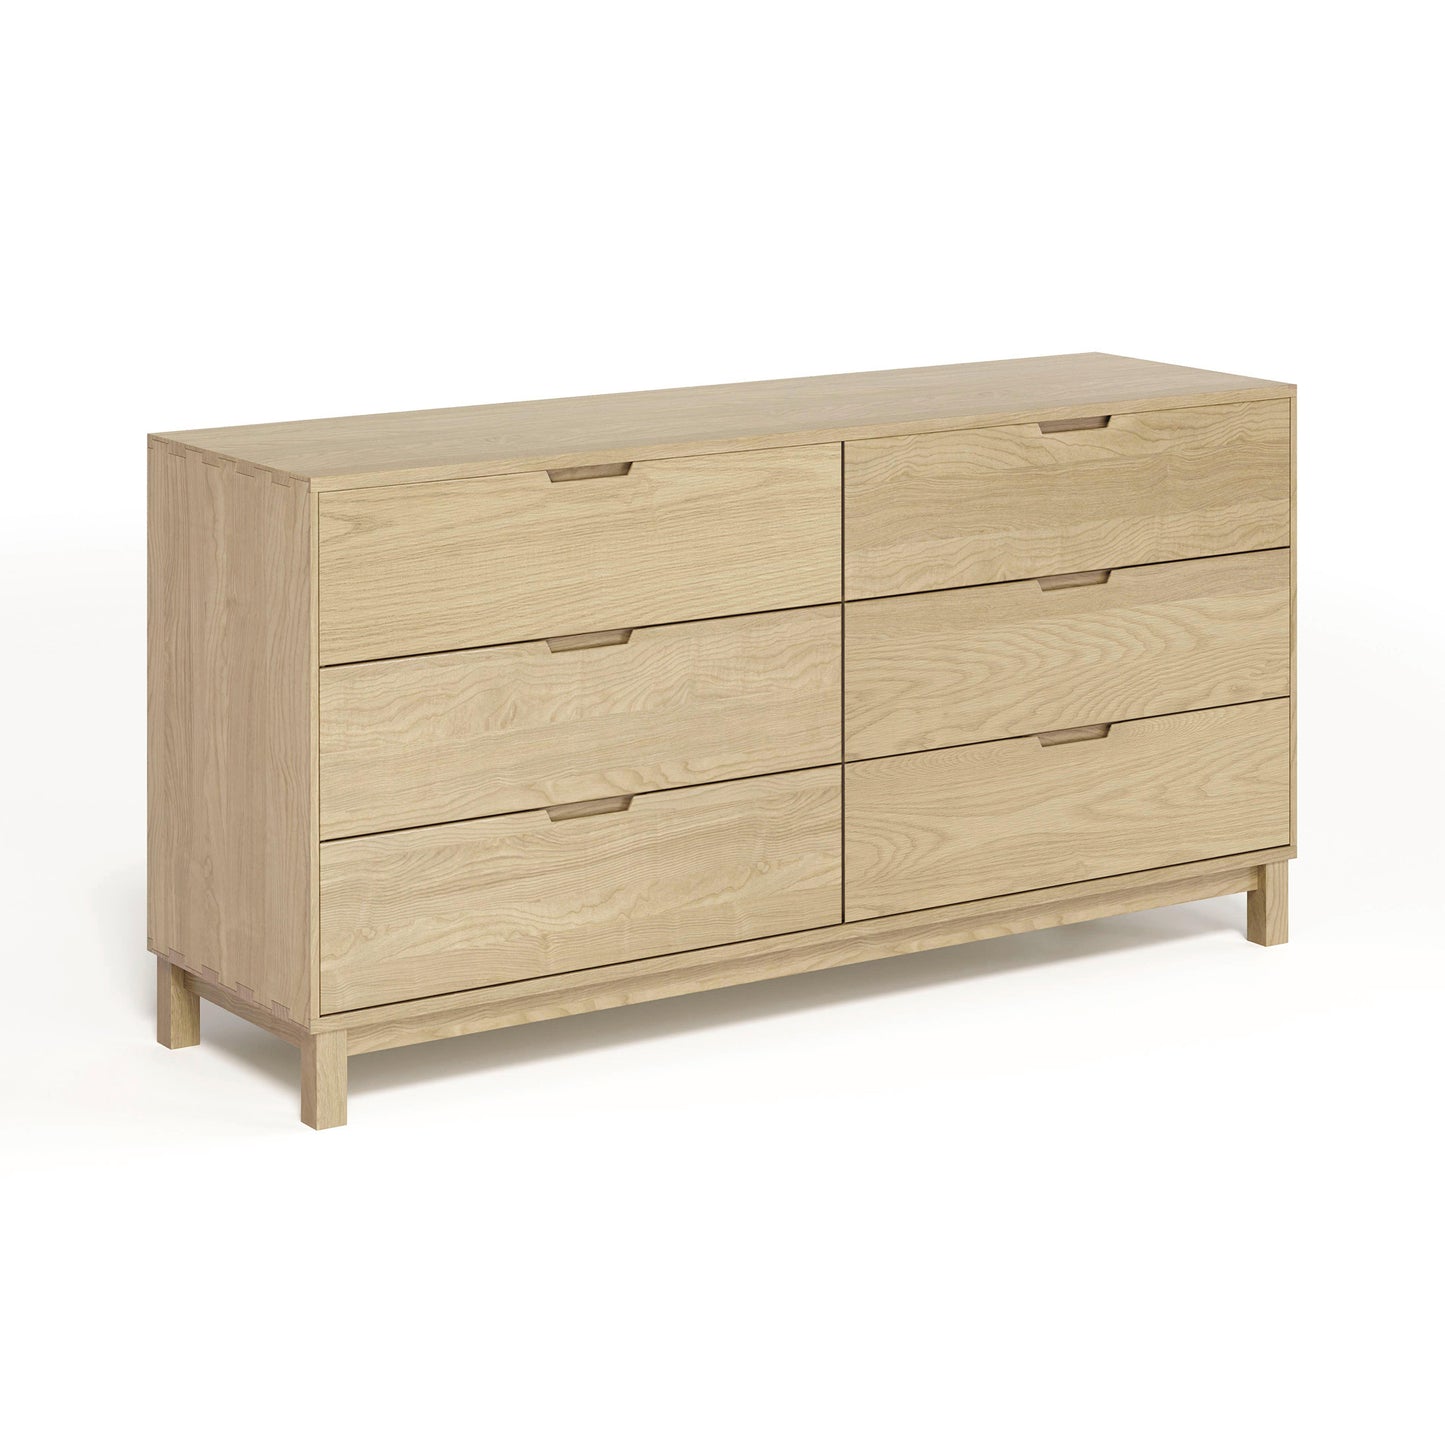 A modern Oslo 6-Drawer Dresser by Copeland Furniture on a white background.